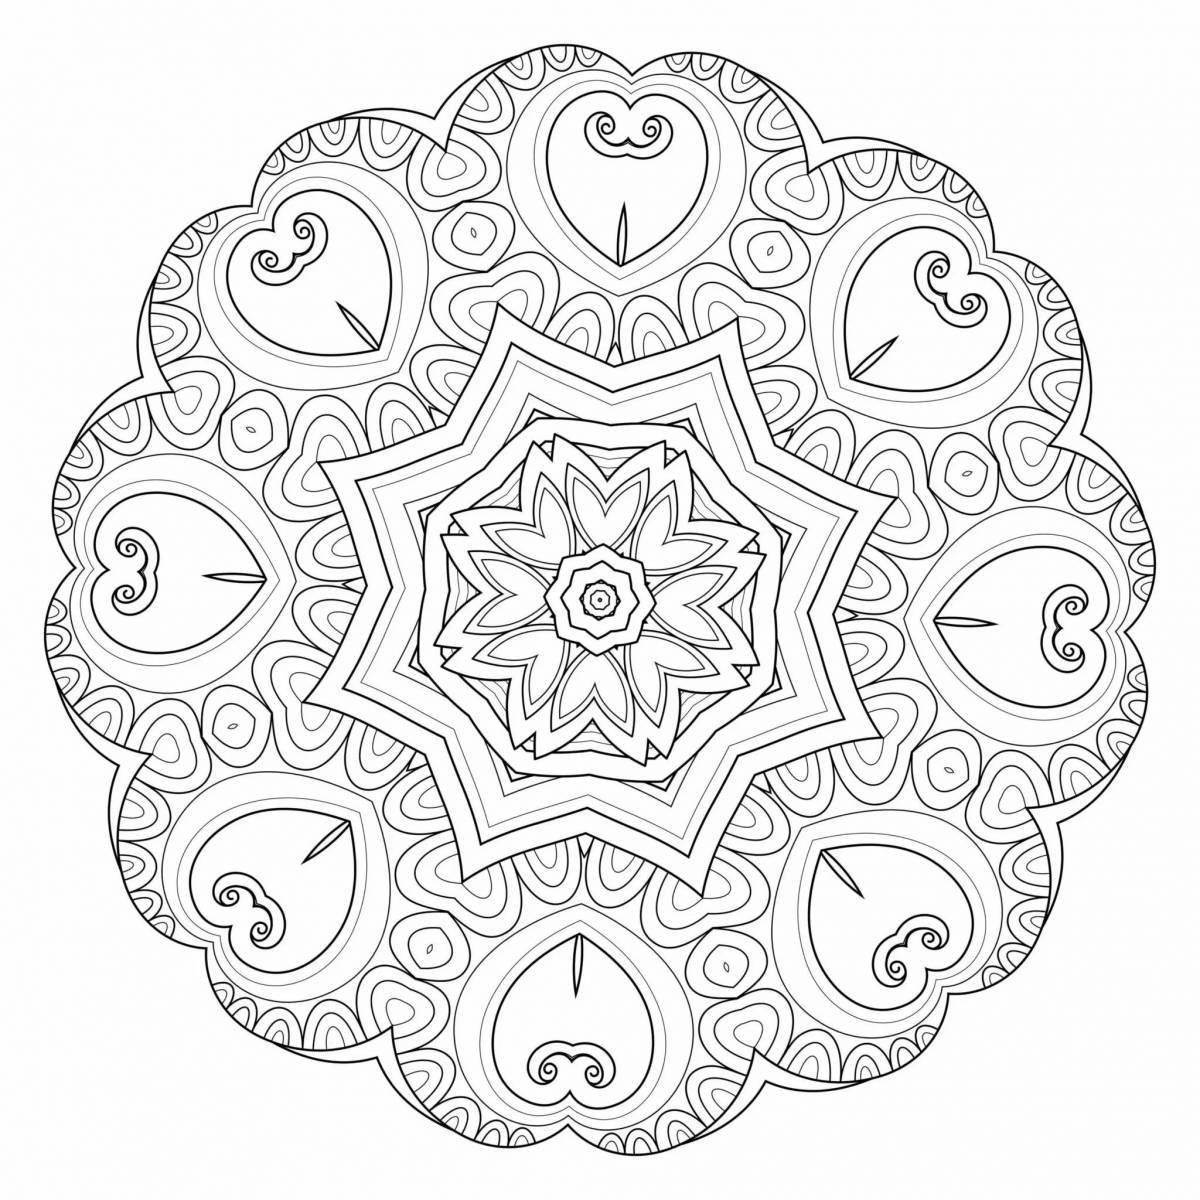 Fascinating mantra coloring pages